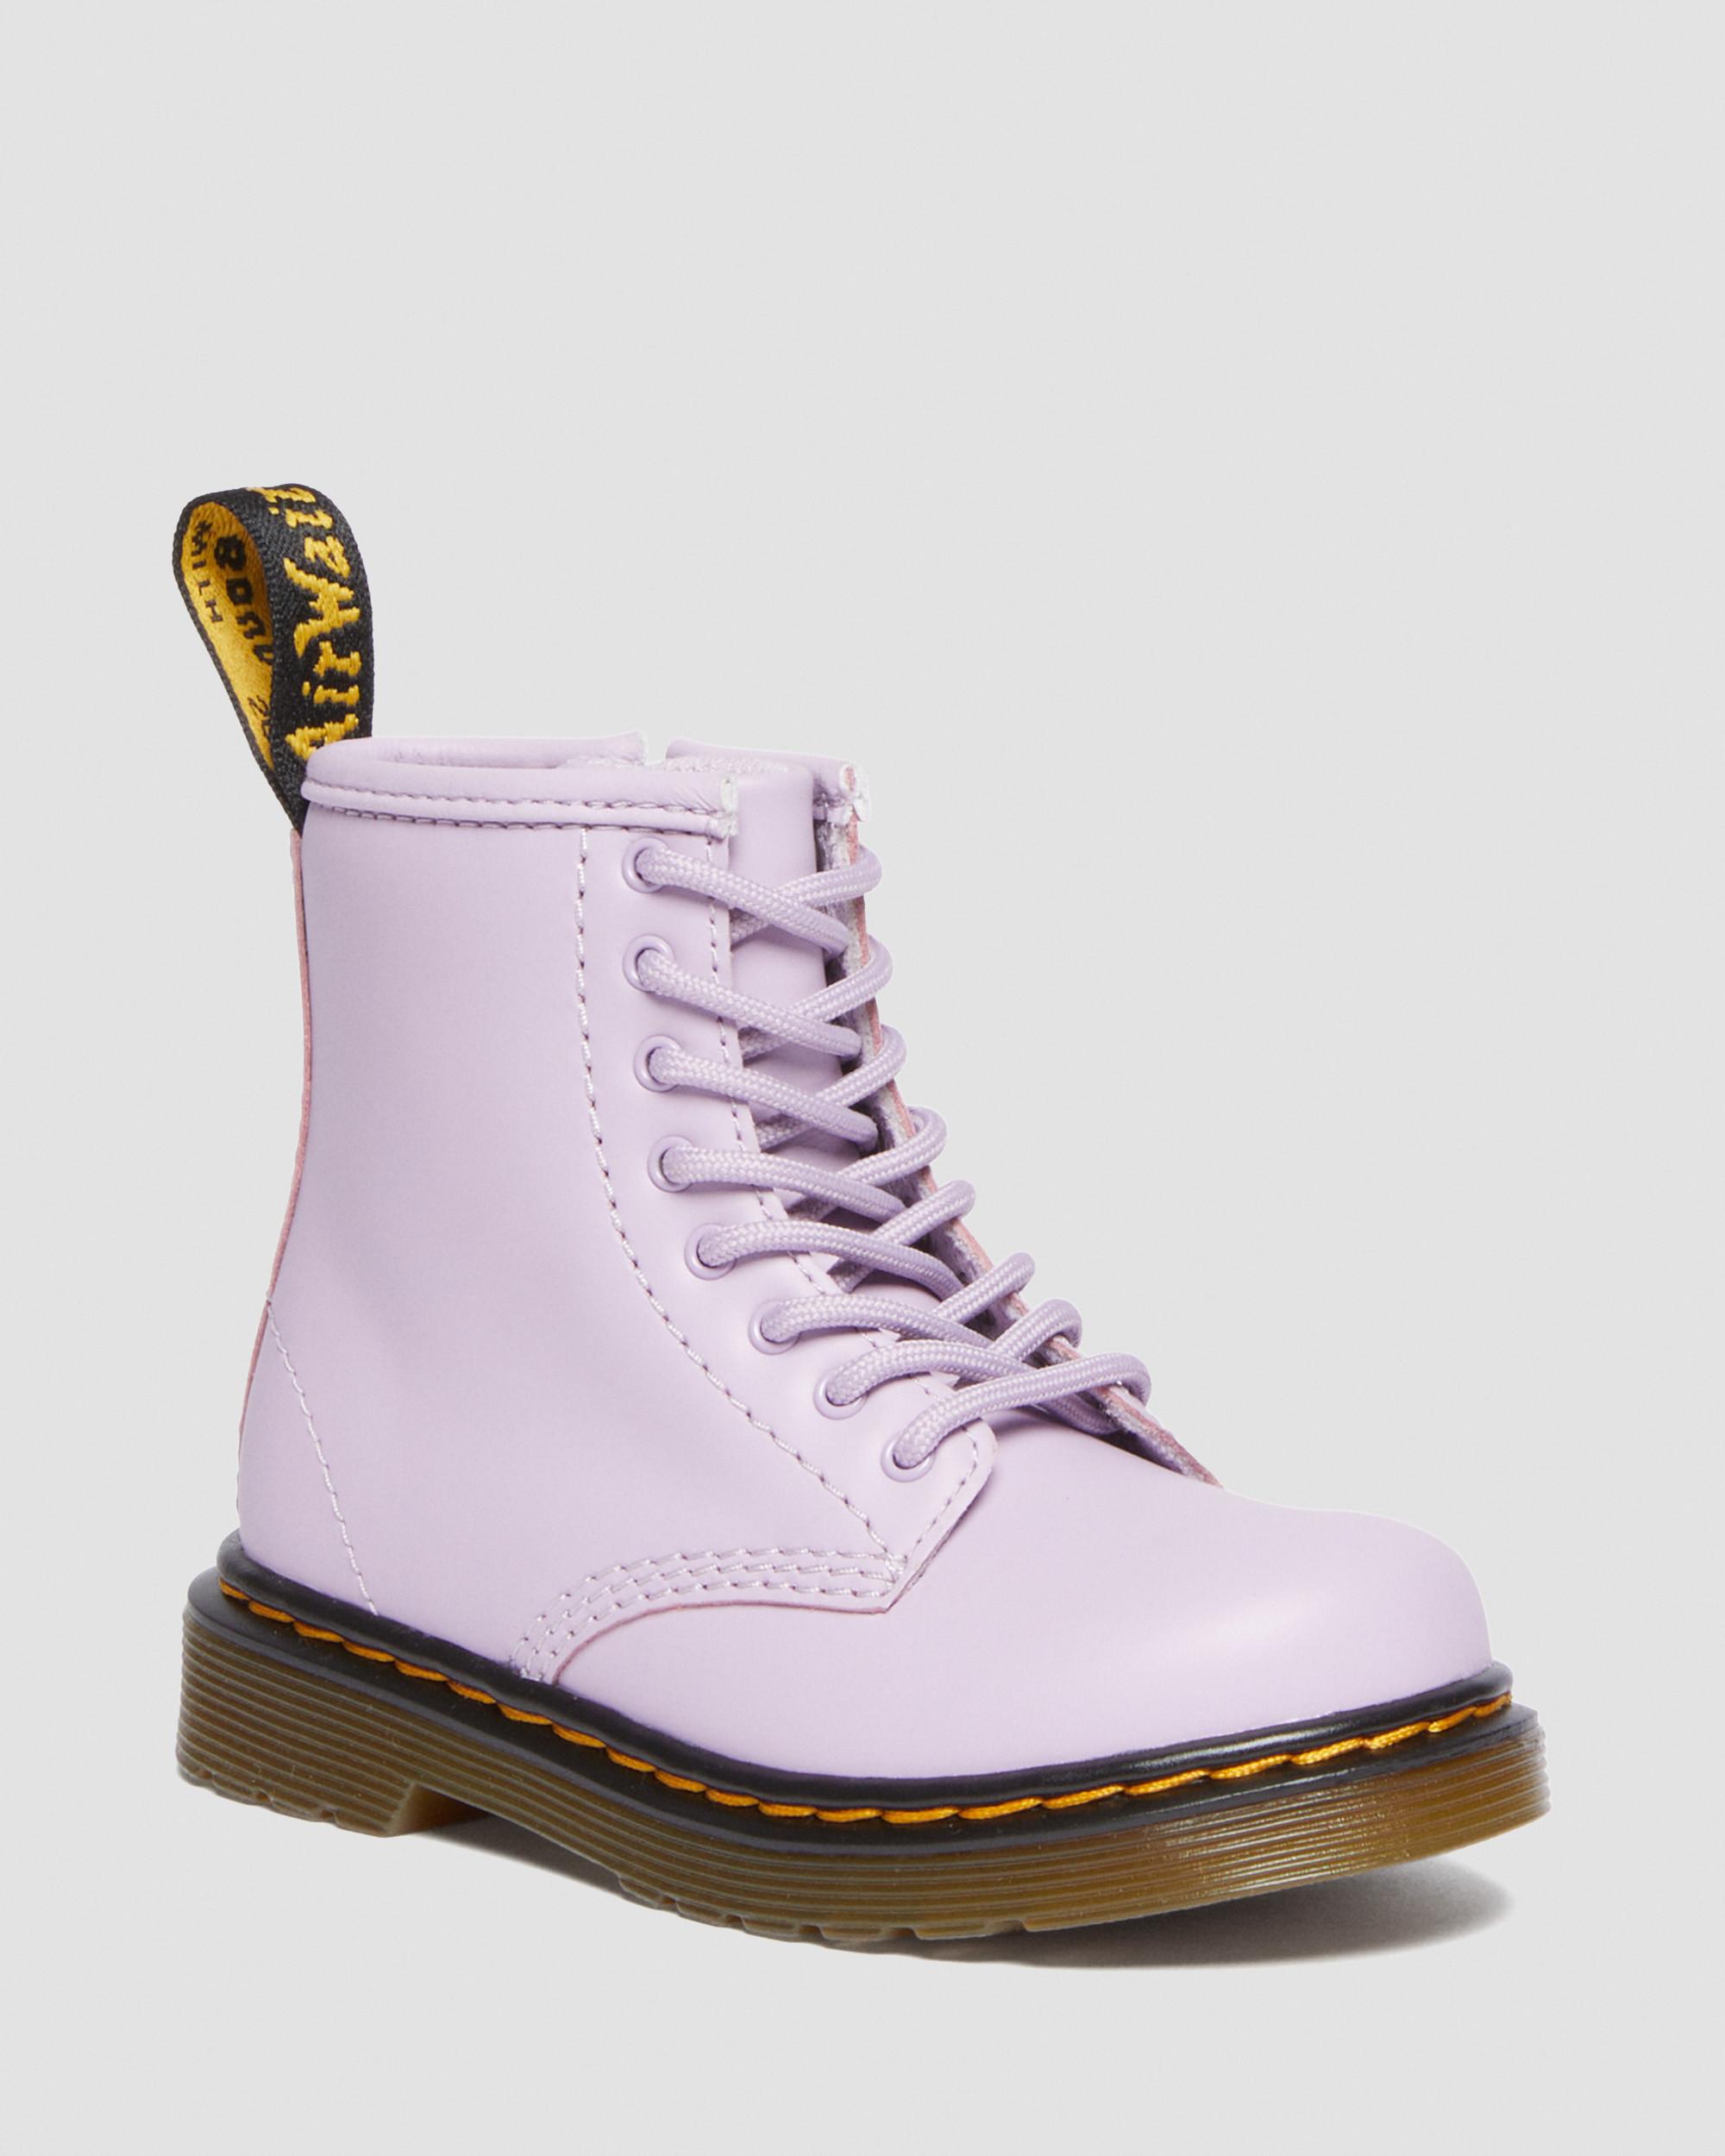 Toddler 1460 Softy T Leather Lace Up Boots in Lilac | Dr. Martens